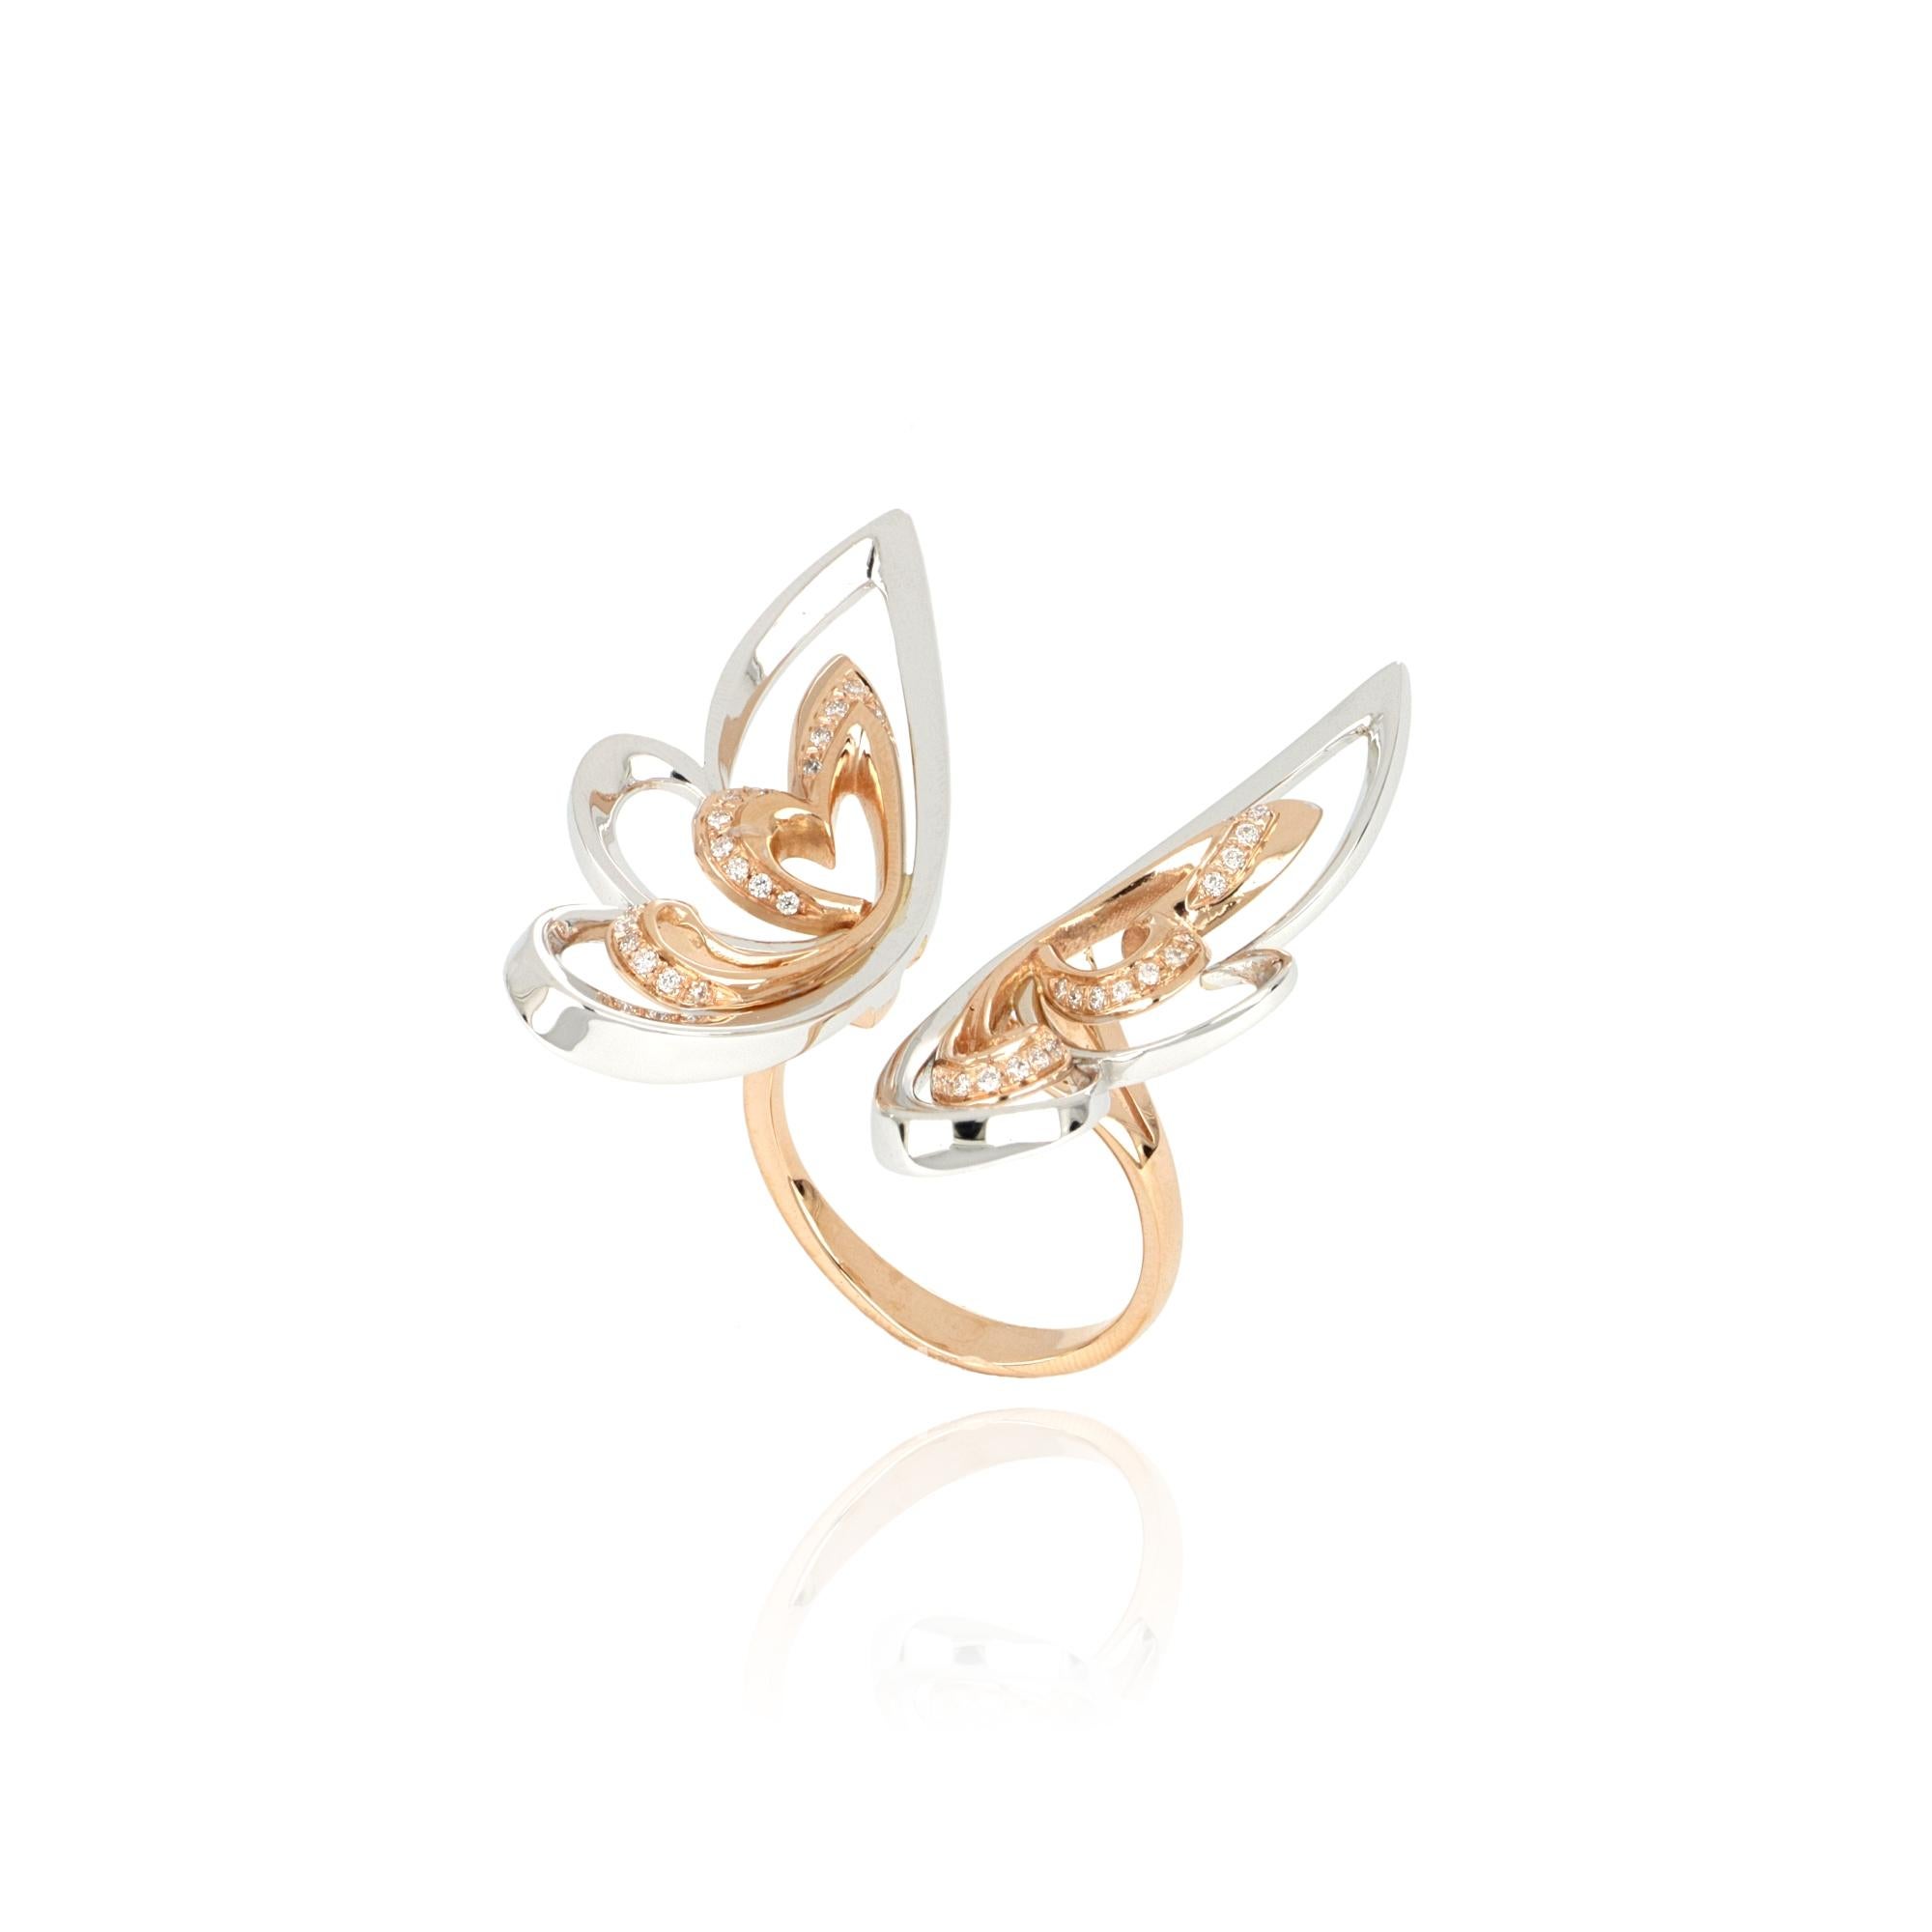 For Sale:  18kt White and Rose Gold 3 Chic Butterfly Ring with White Diamonds 3